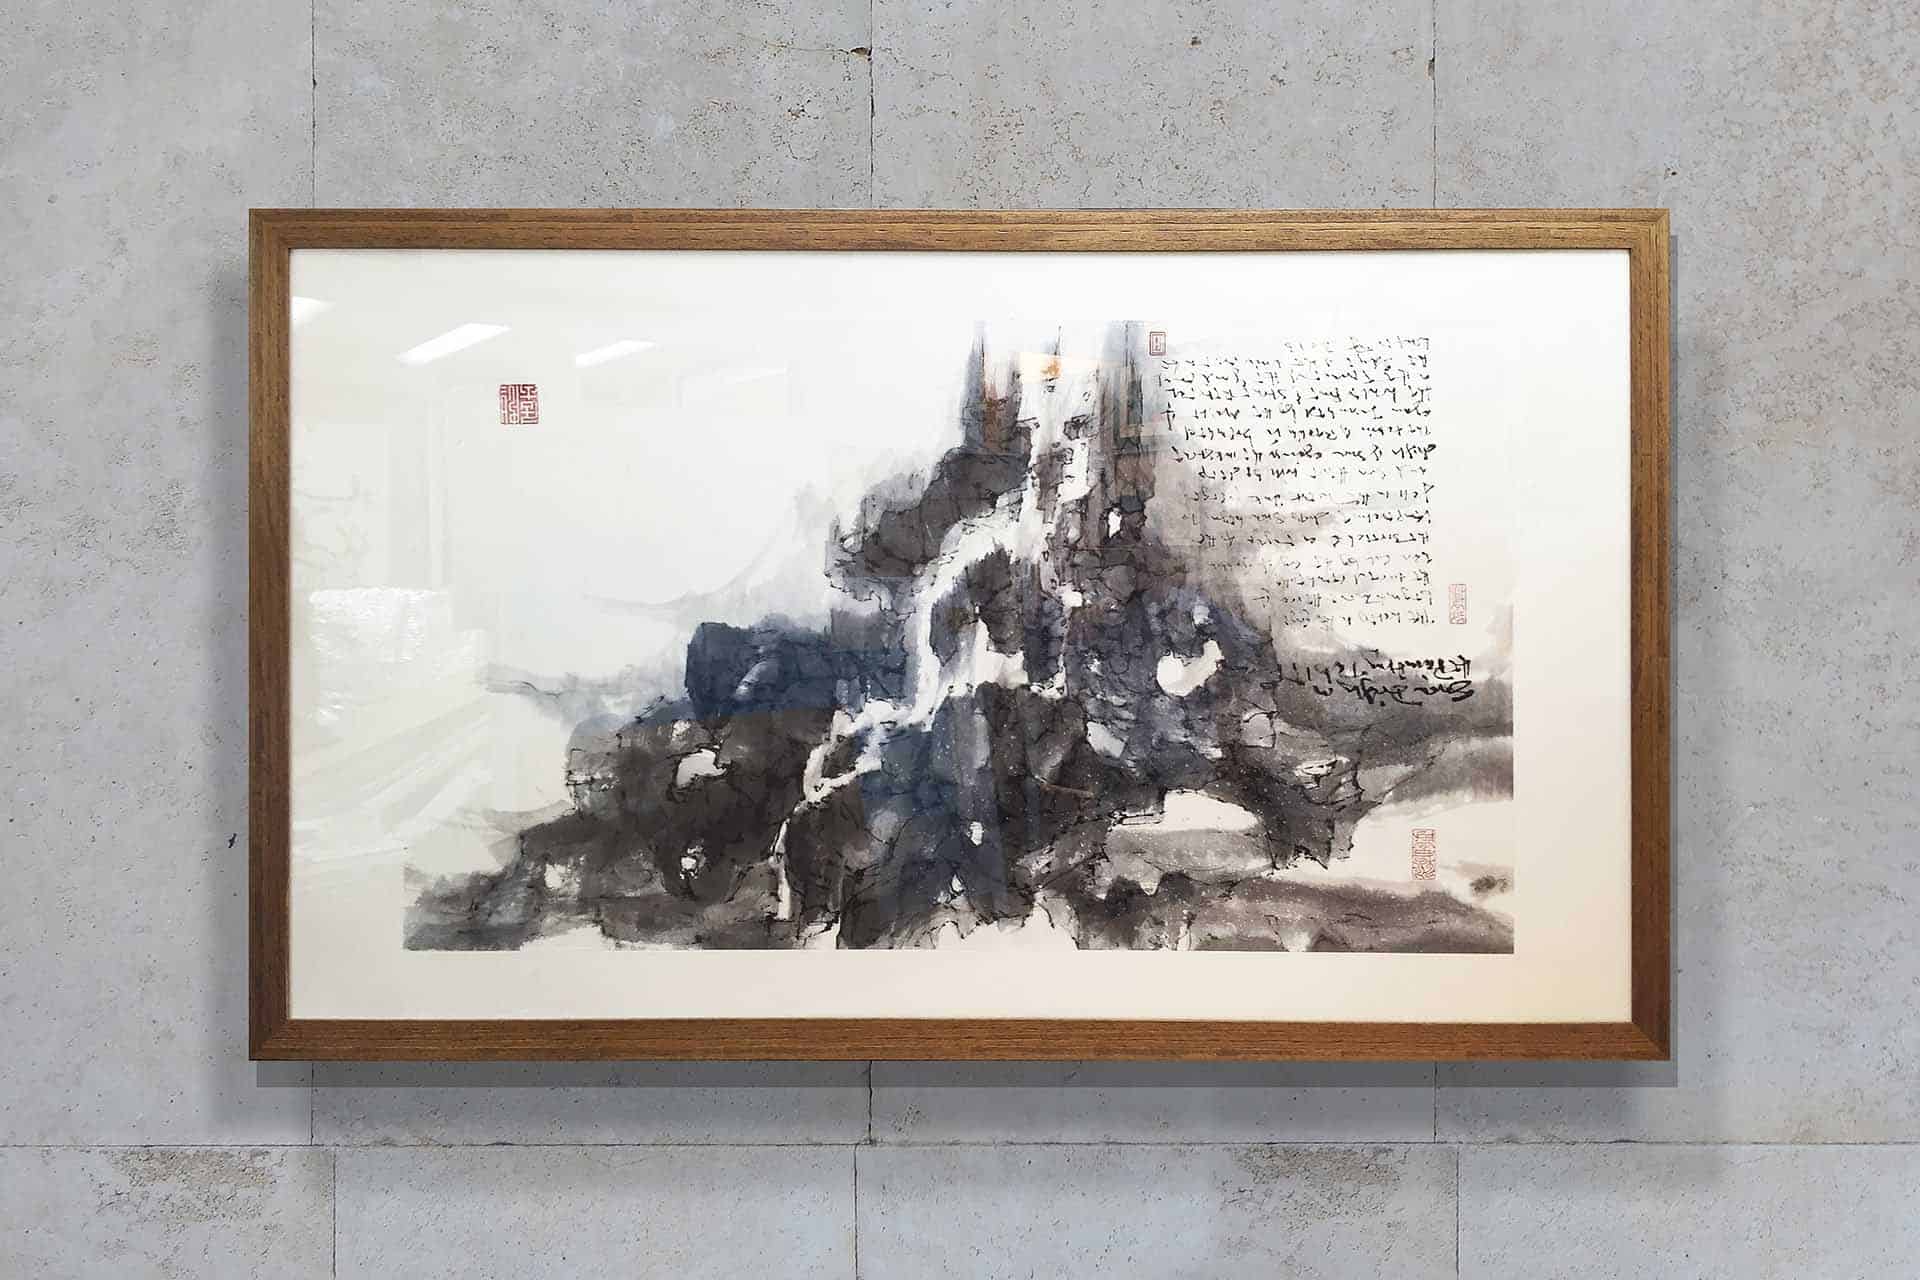 Lee Wah Framing contemporary Chinese ink painting framed in a wooden frame